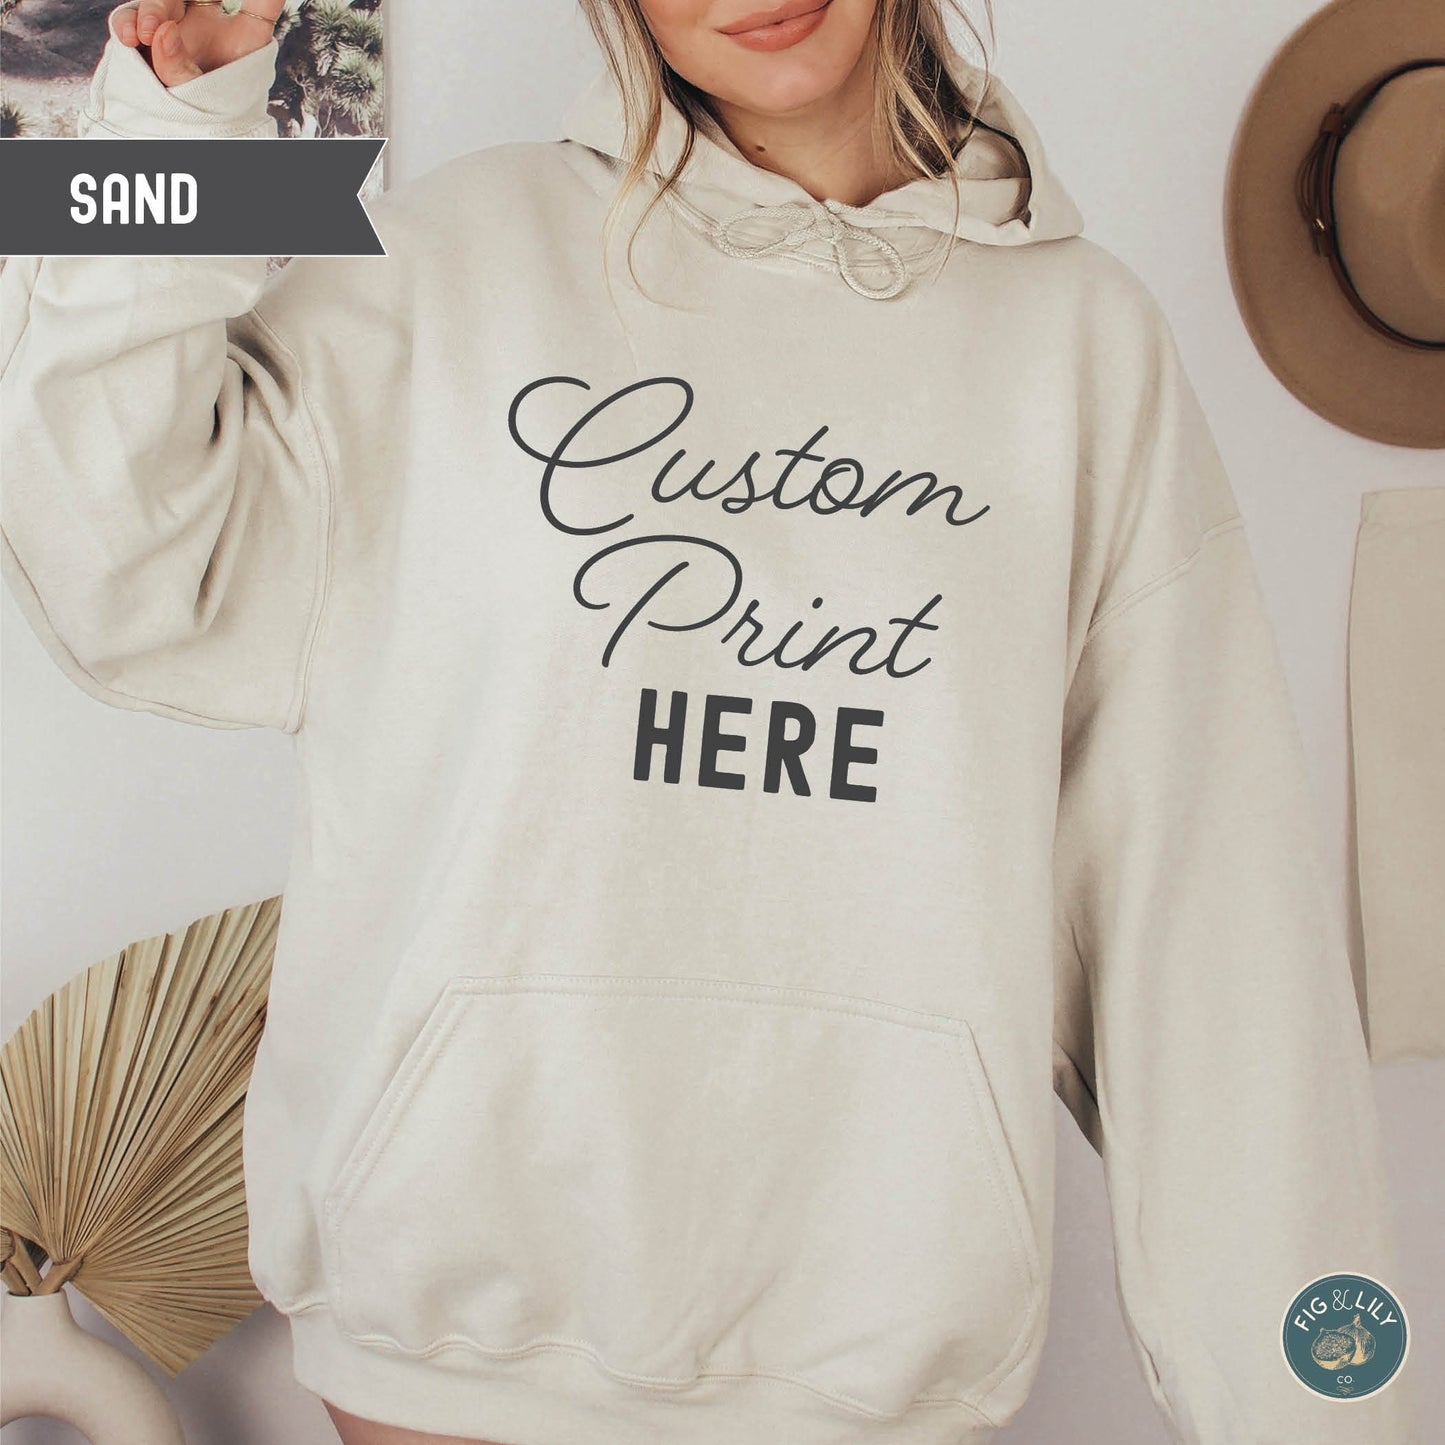 Sand cozy Unisex Hoodie, Custom Printed sweatshirt Design, Your Design Here, Personalized Design created just for you, digital proof approval included